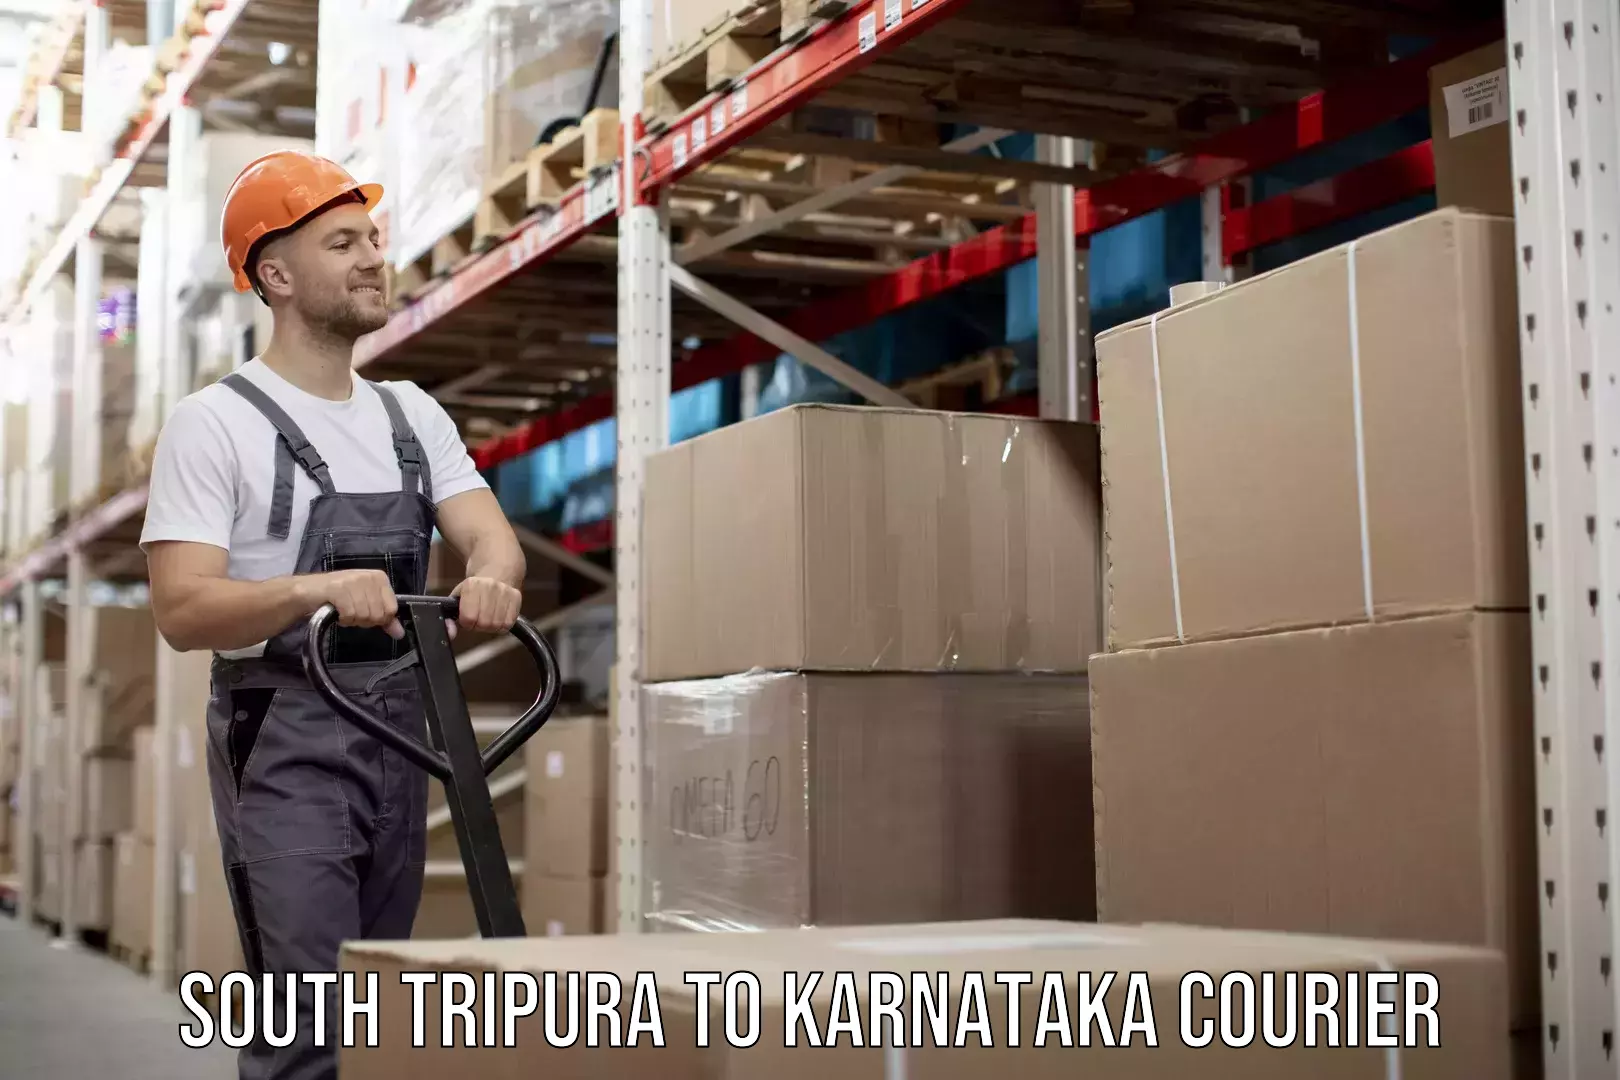 Personal courier services in South Tripura to Karnataka